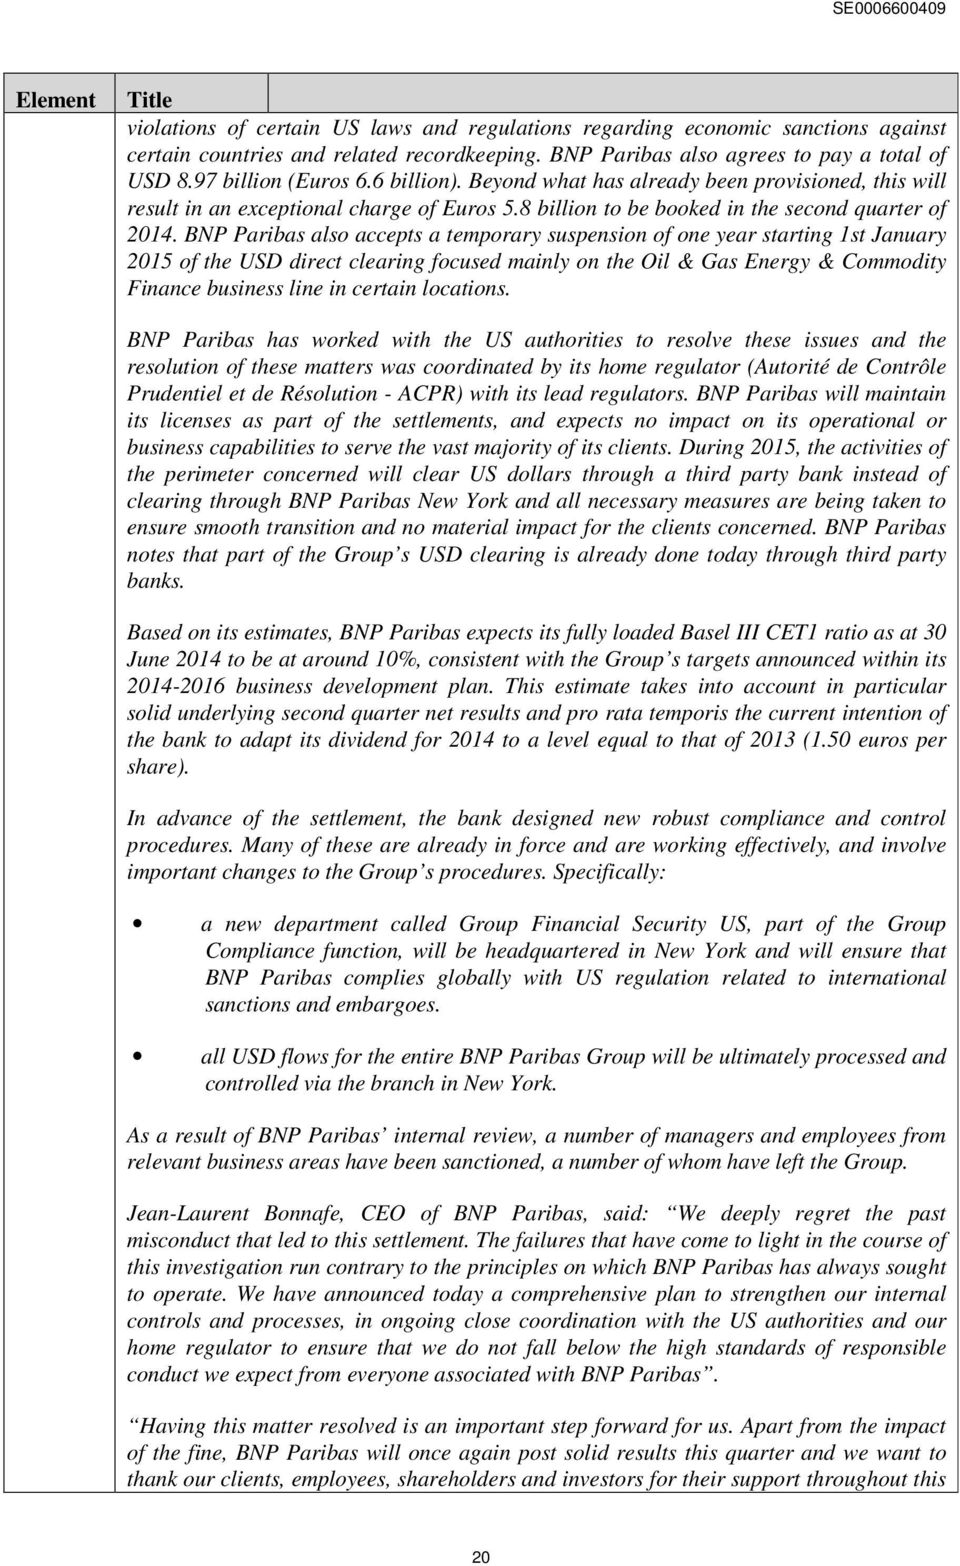 BNP Paribas also accepts a temporary suspension of one year starting 1st January 2015 of the USD direct clearing focused mainly on the Oil & Gas Energy & Commodity Finance business line in certain